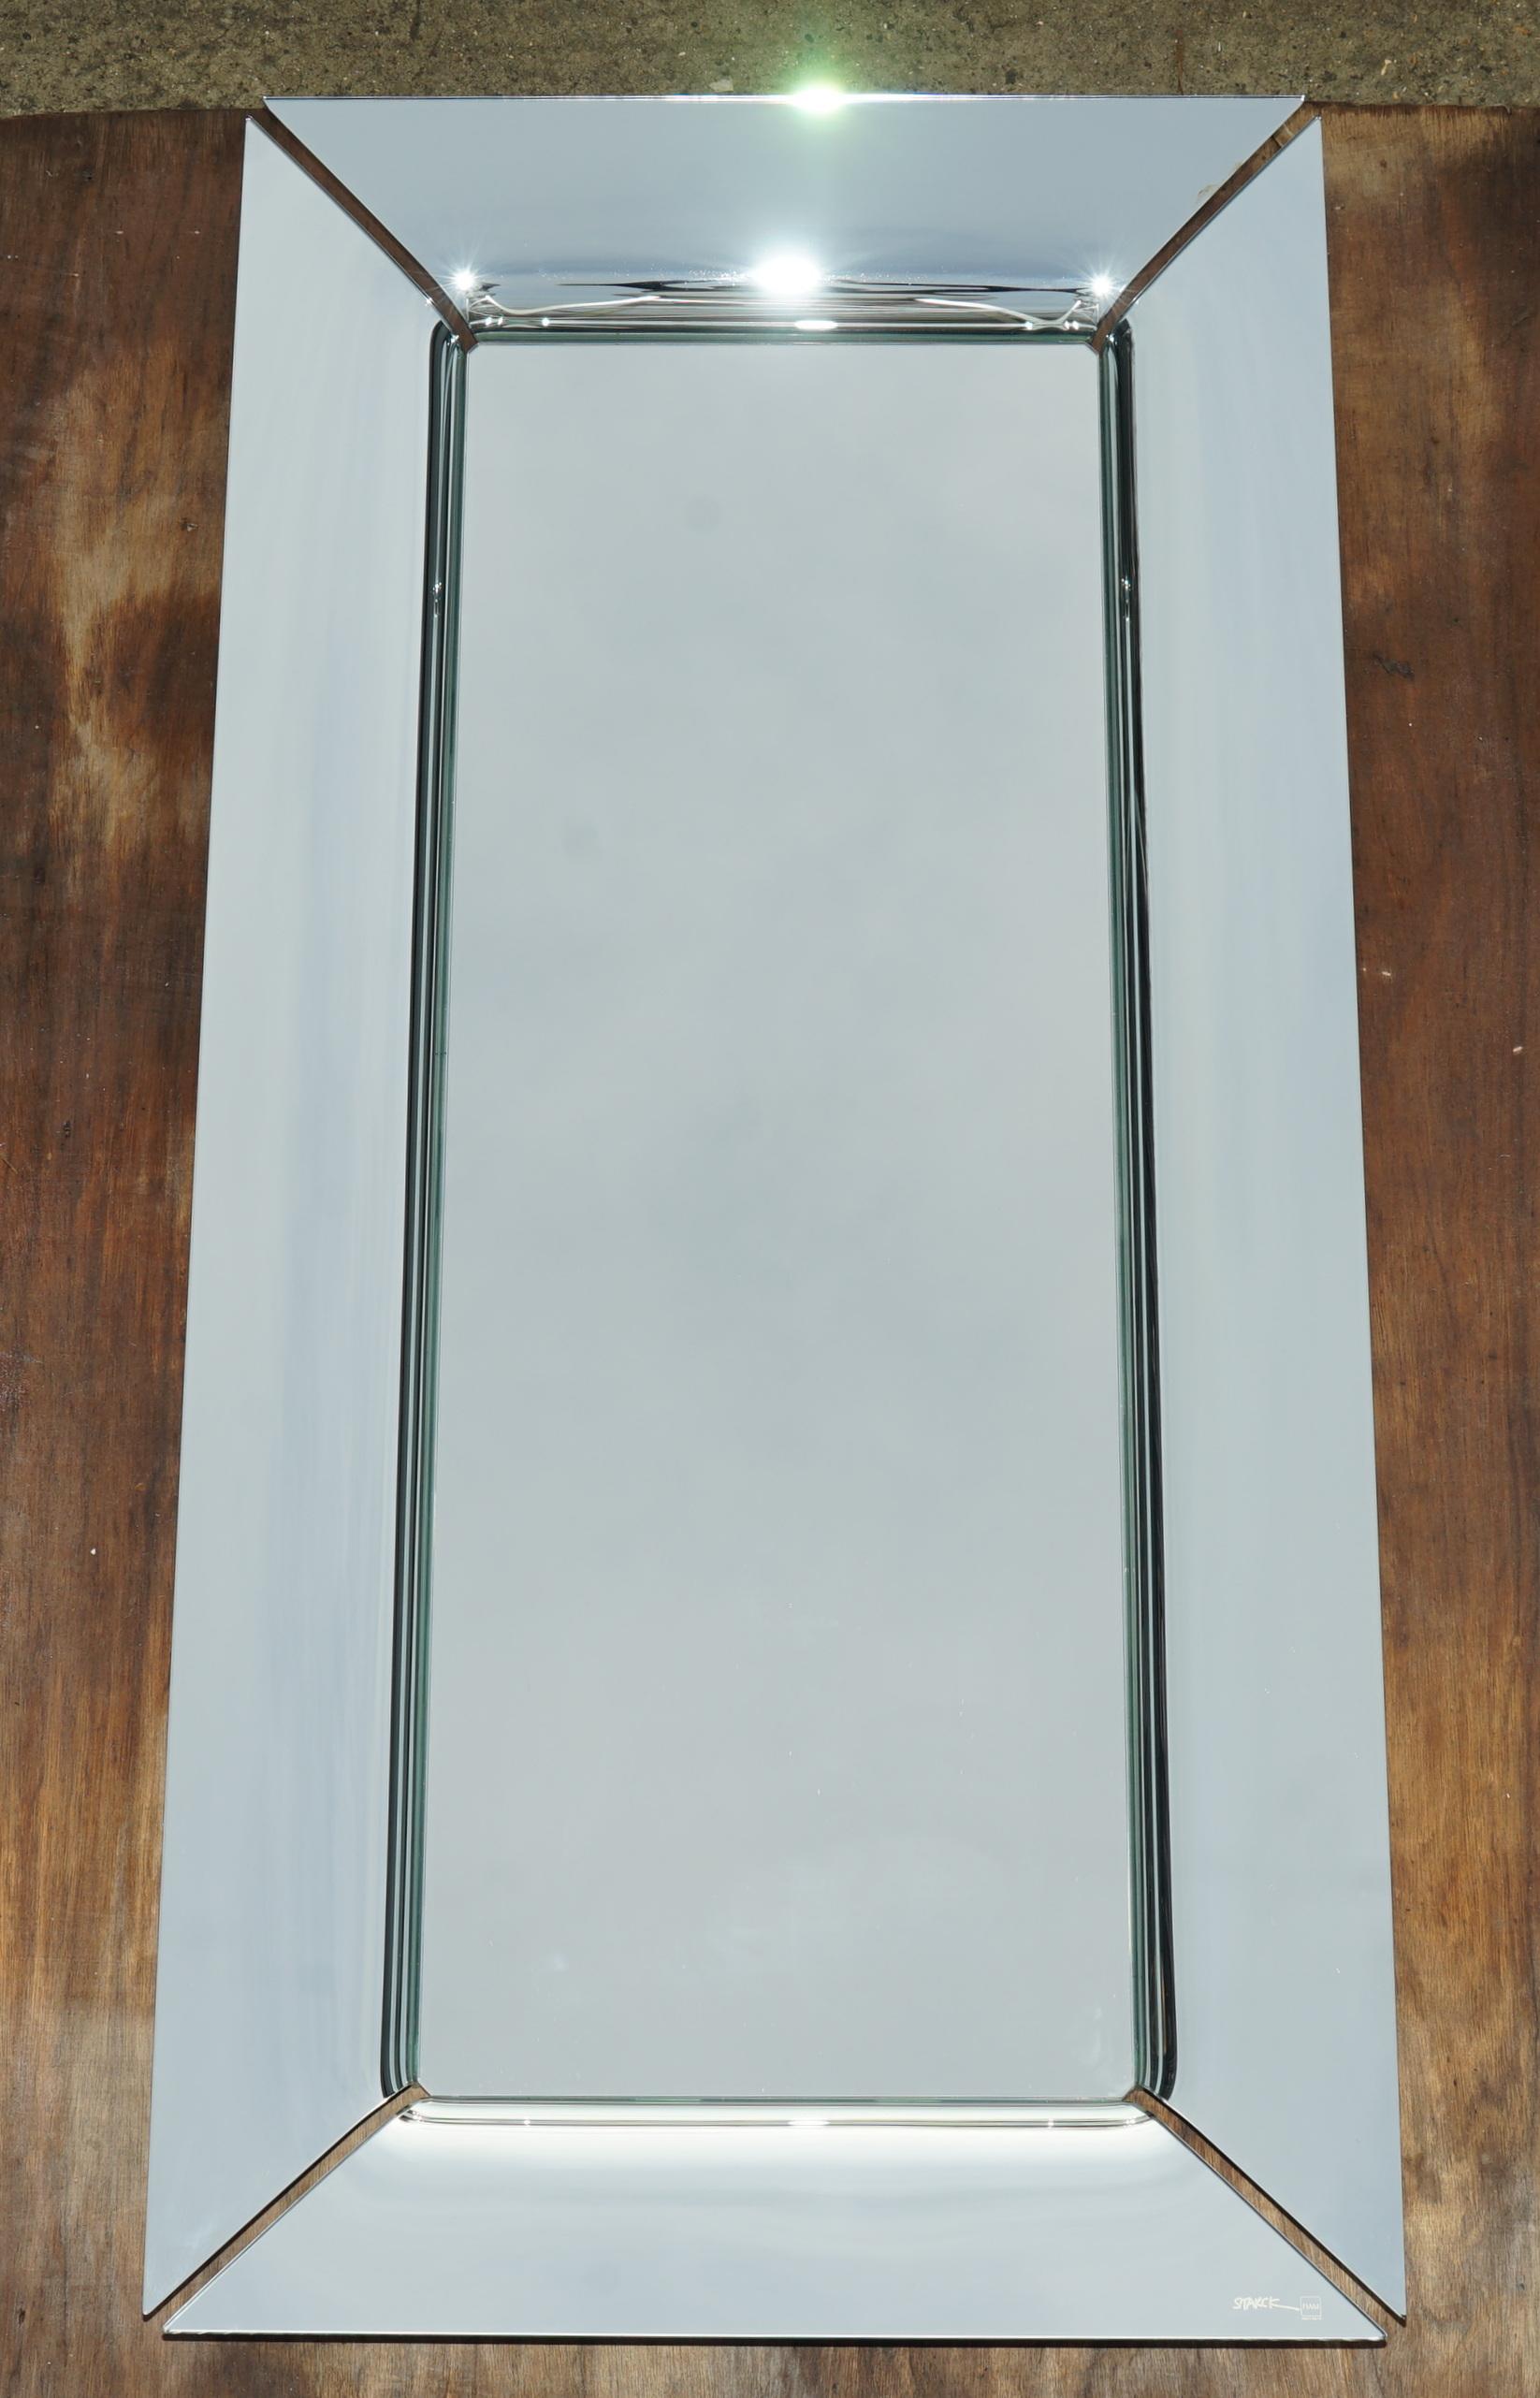 Art Deco PAIR OF SUBLIME DESIGNER PHILIPPE STARCK FIAM CAADRE WALL MiRRORS 155CM TALL For Sale